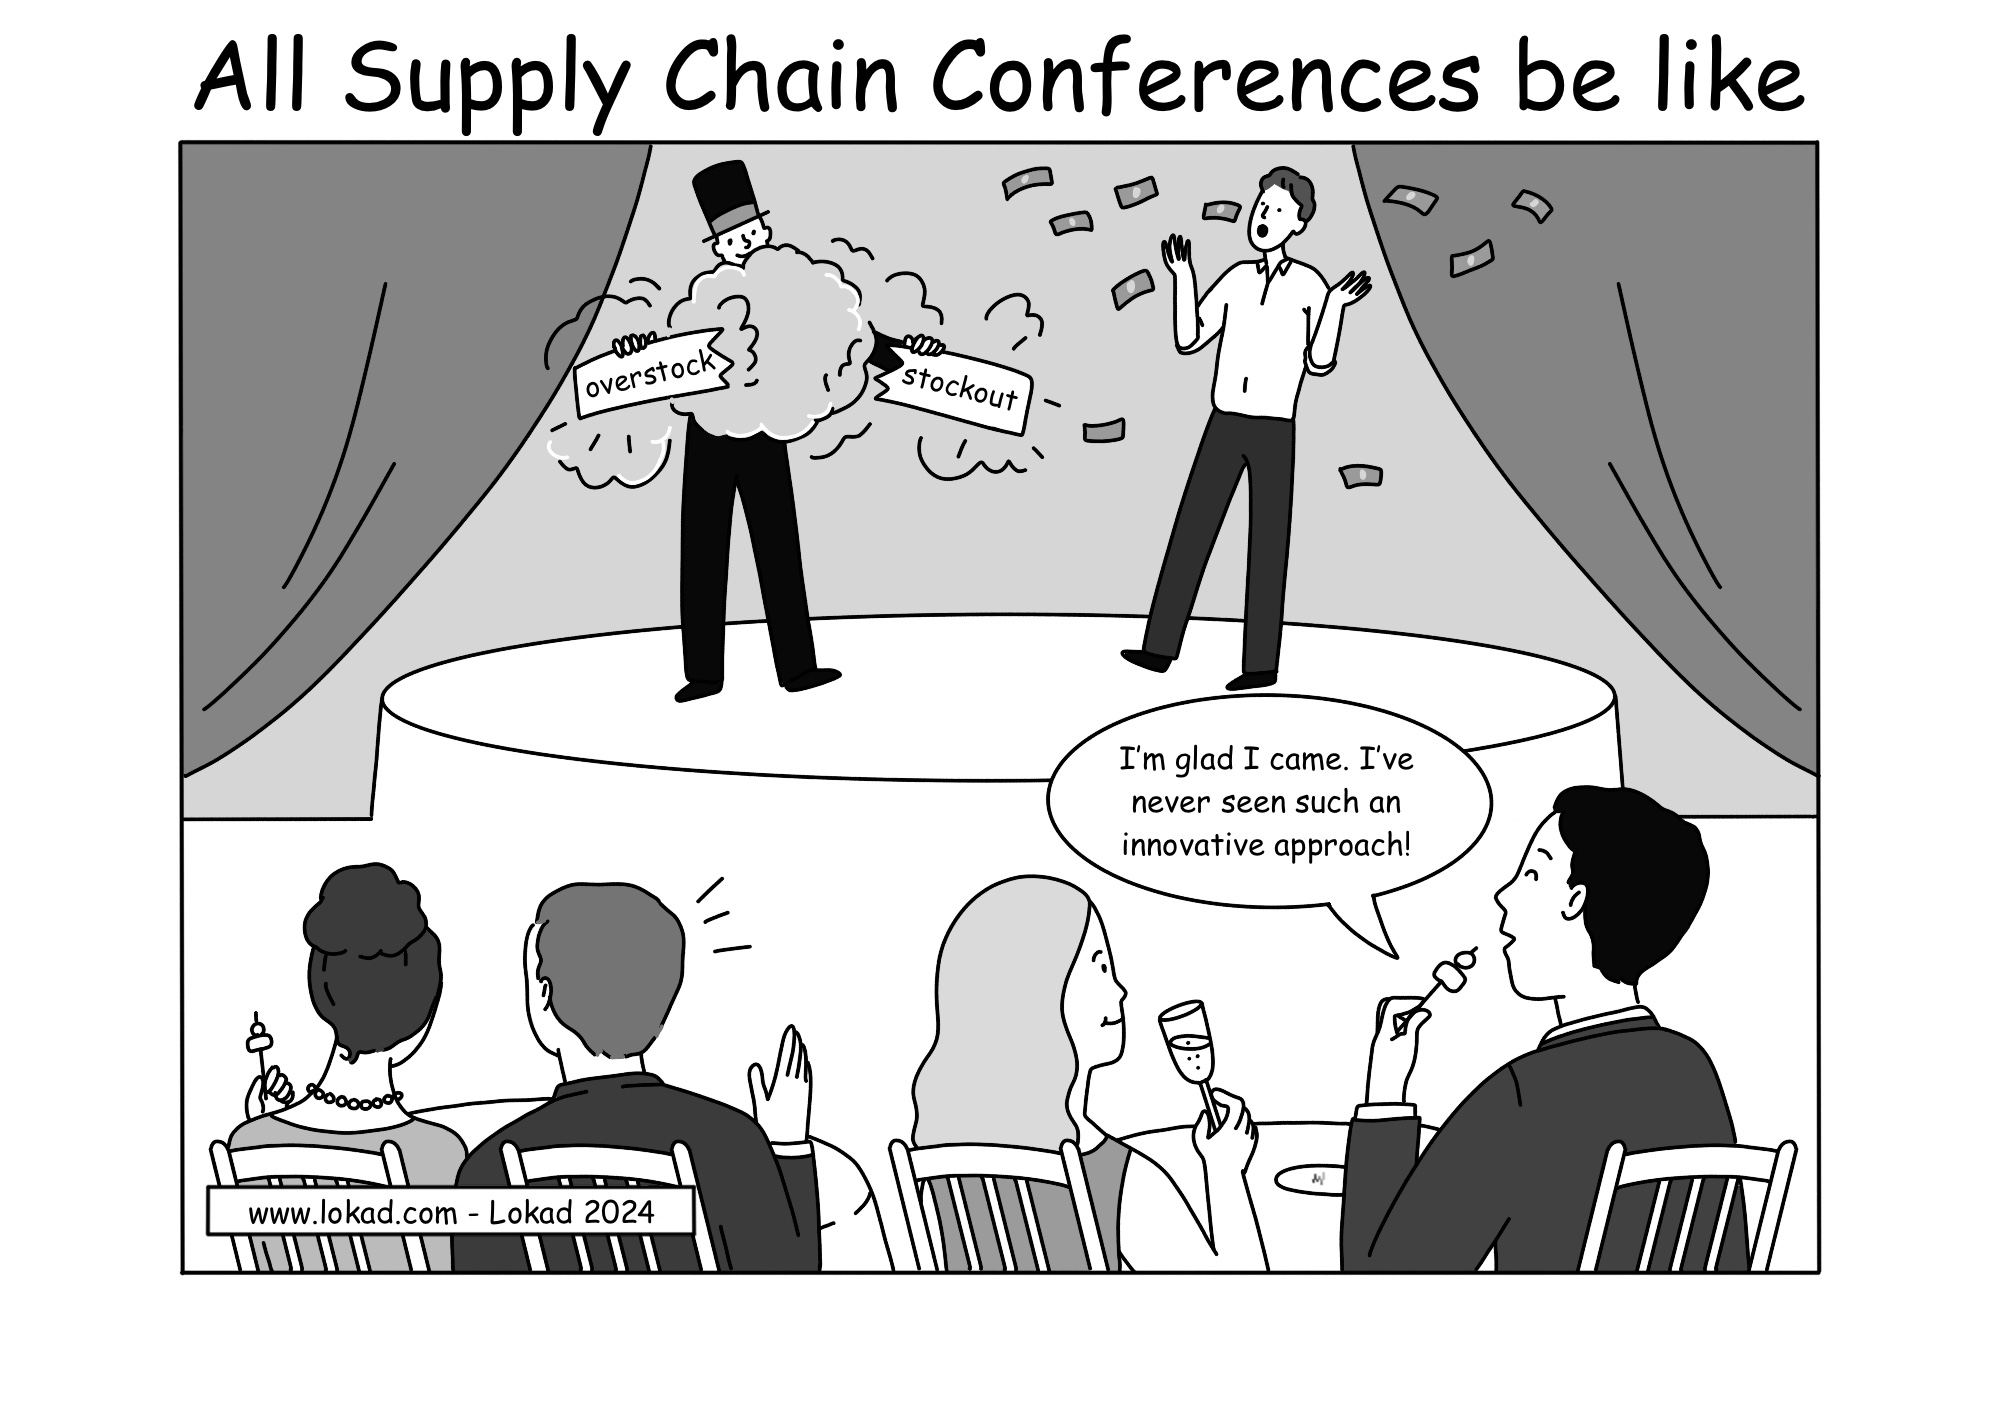 All Supply Chain Conferences be like